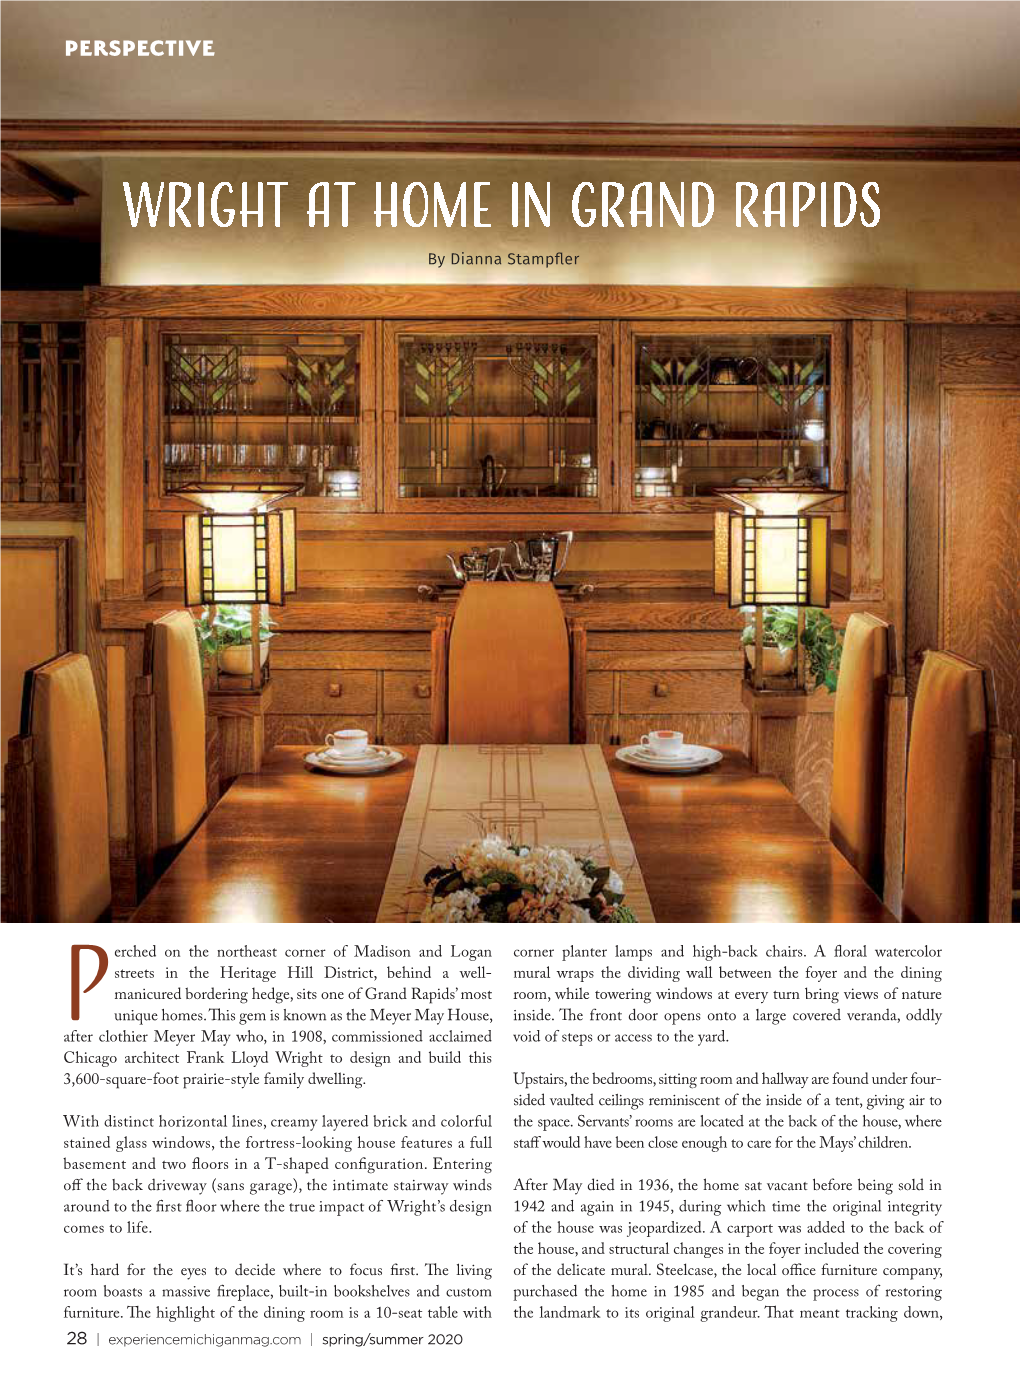 WRIGHT at HOME in GRAND RAPIDS by Dianna Stampfler